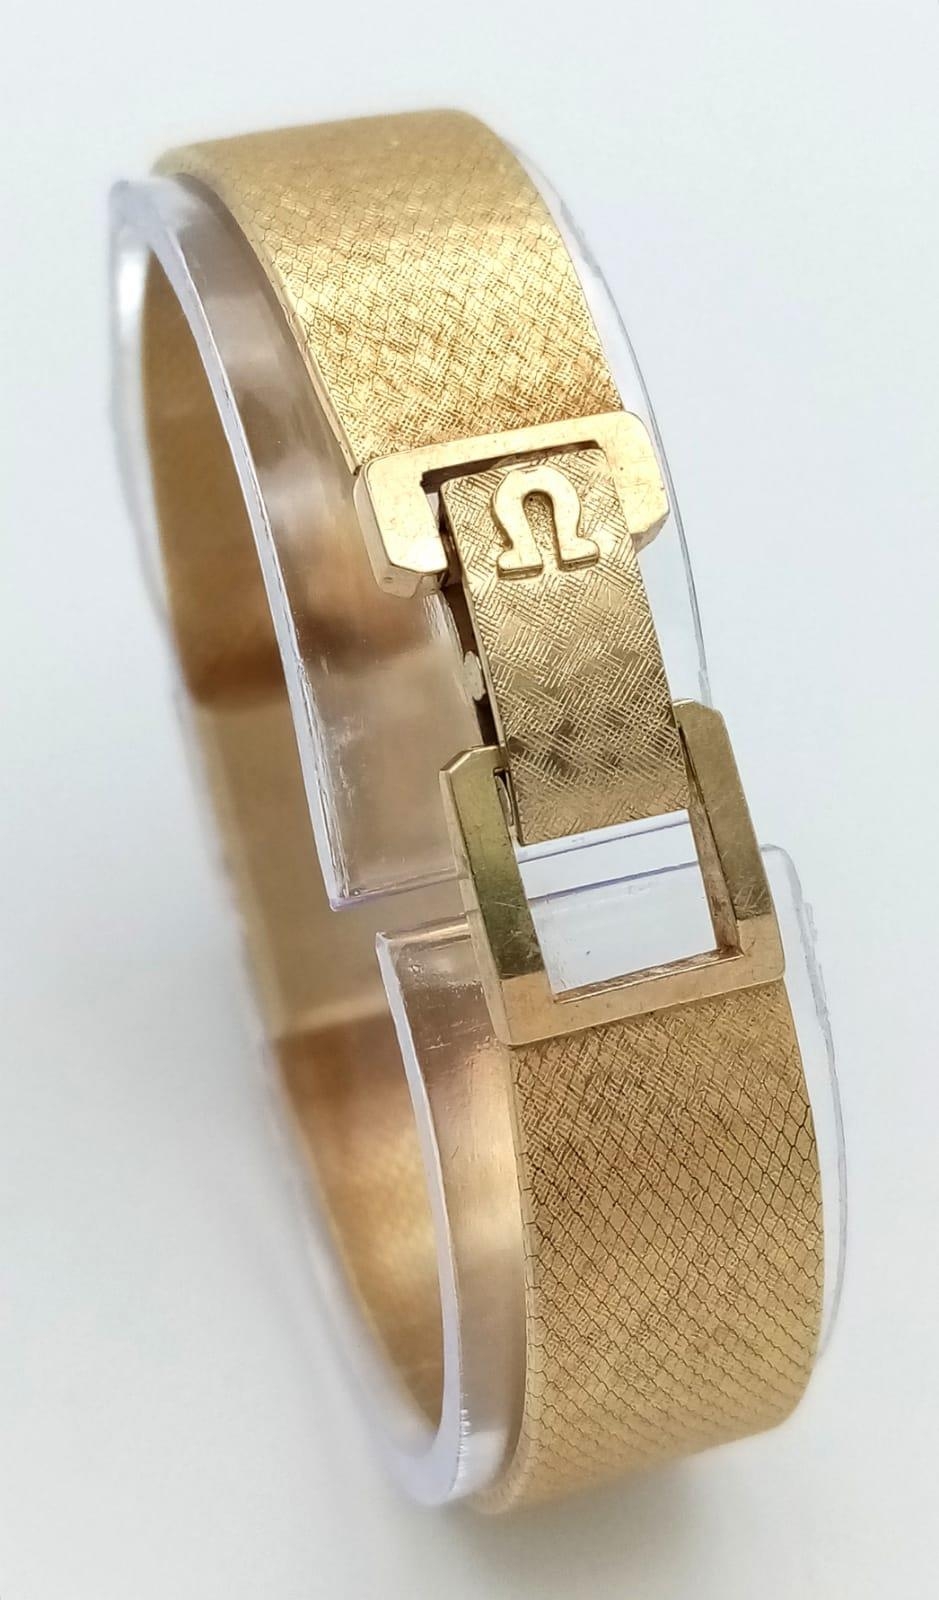 A VINTAGE LADIES 14K GOLD OMEGA CLASSIC 17 JEWELS MANUAL WIND WRIST WATCH WITH PATTERNED GOLD TONE - Image 3 of 6